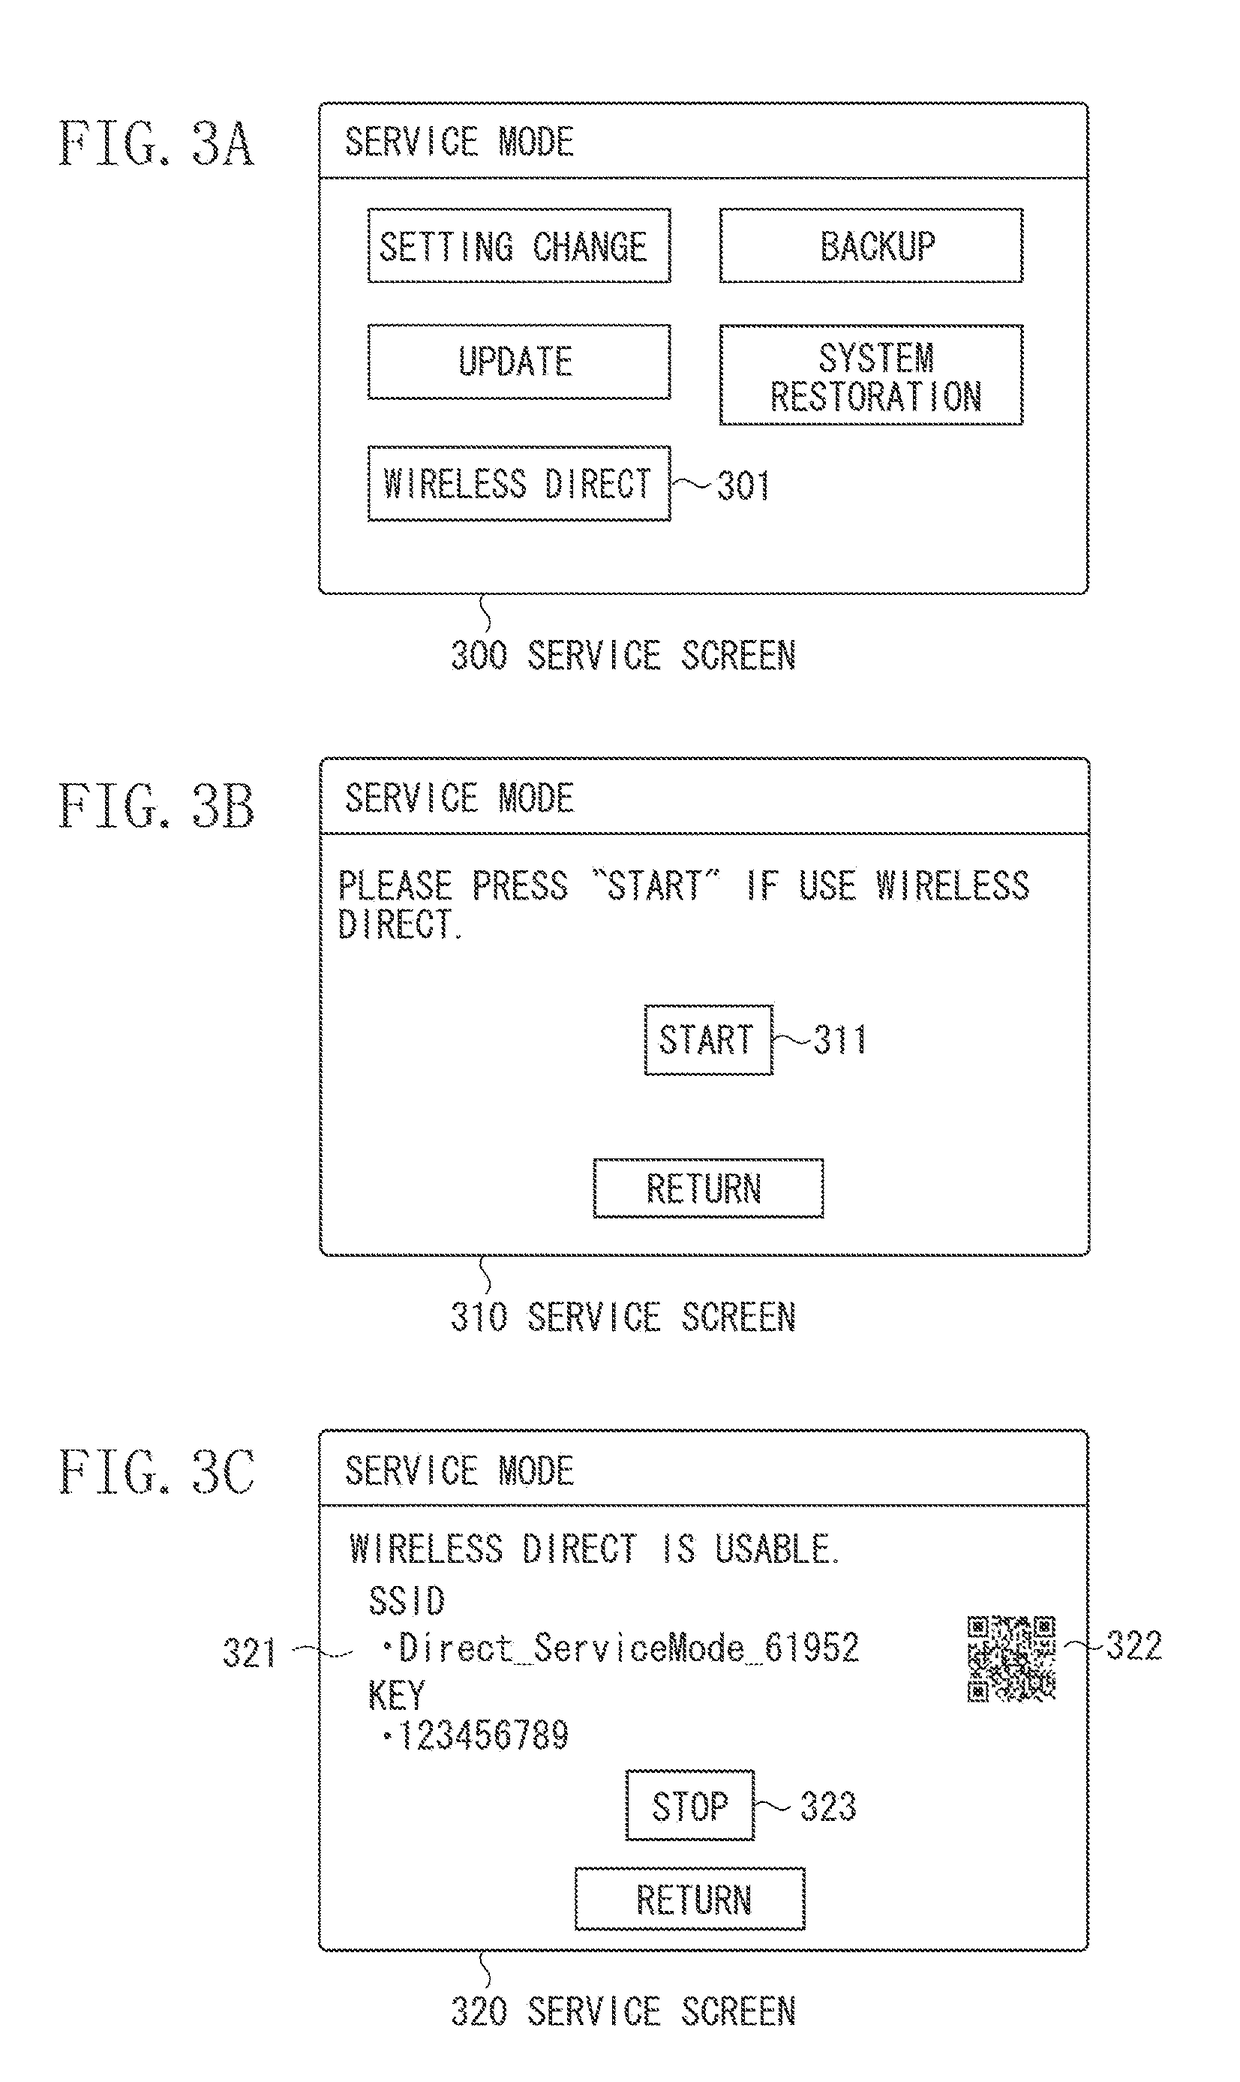 Printing apparatus operable in service mode for work performed by service engineer